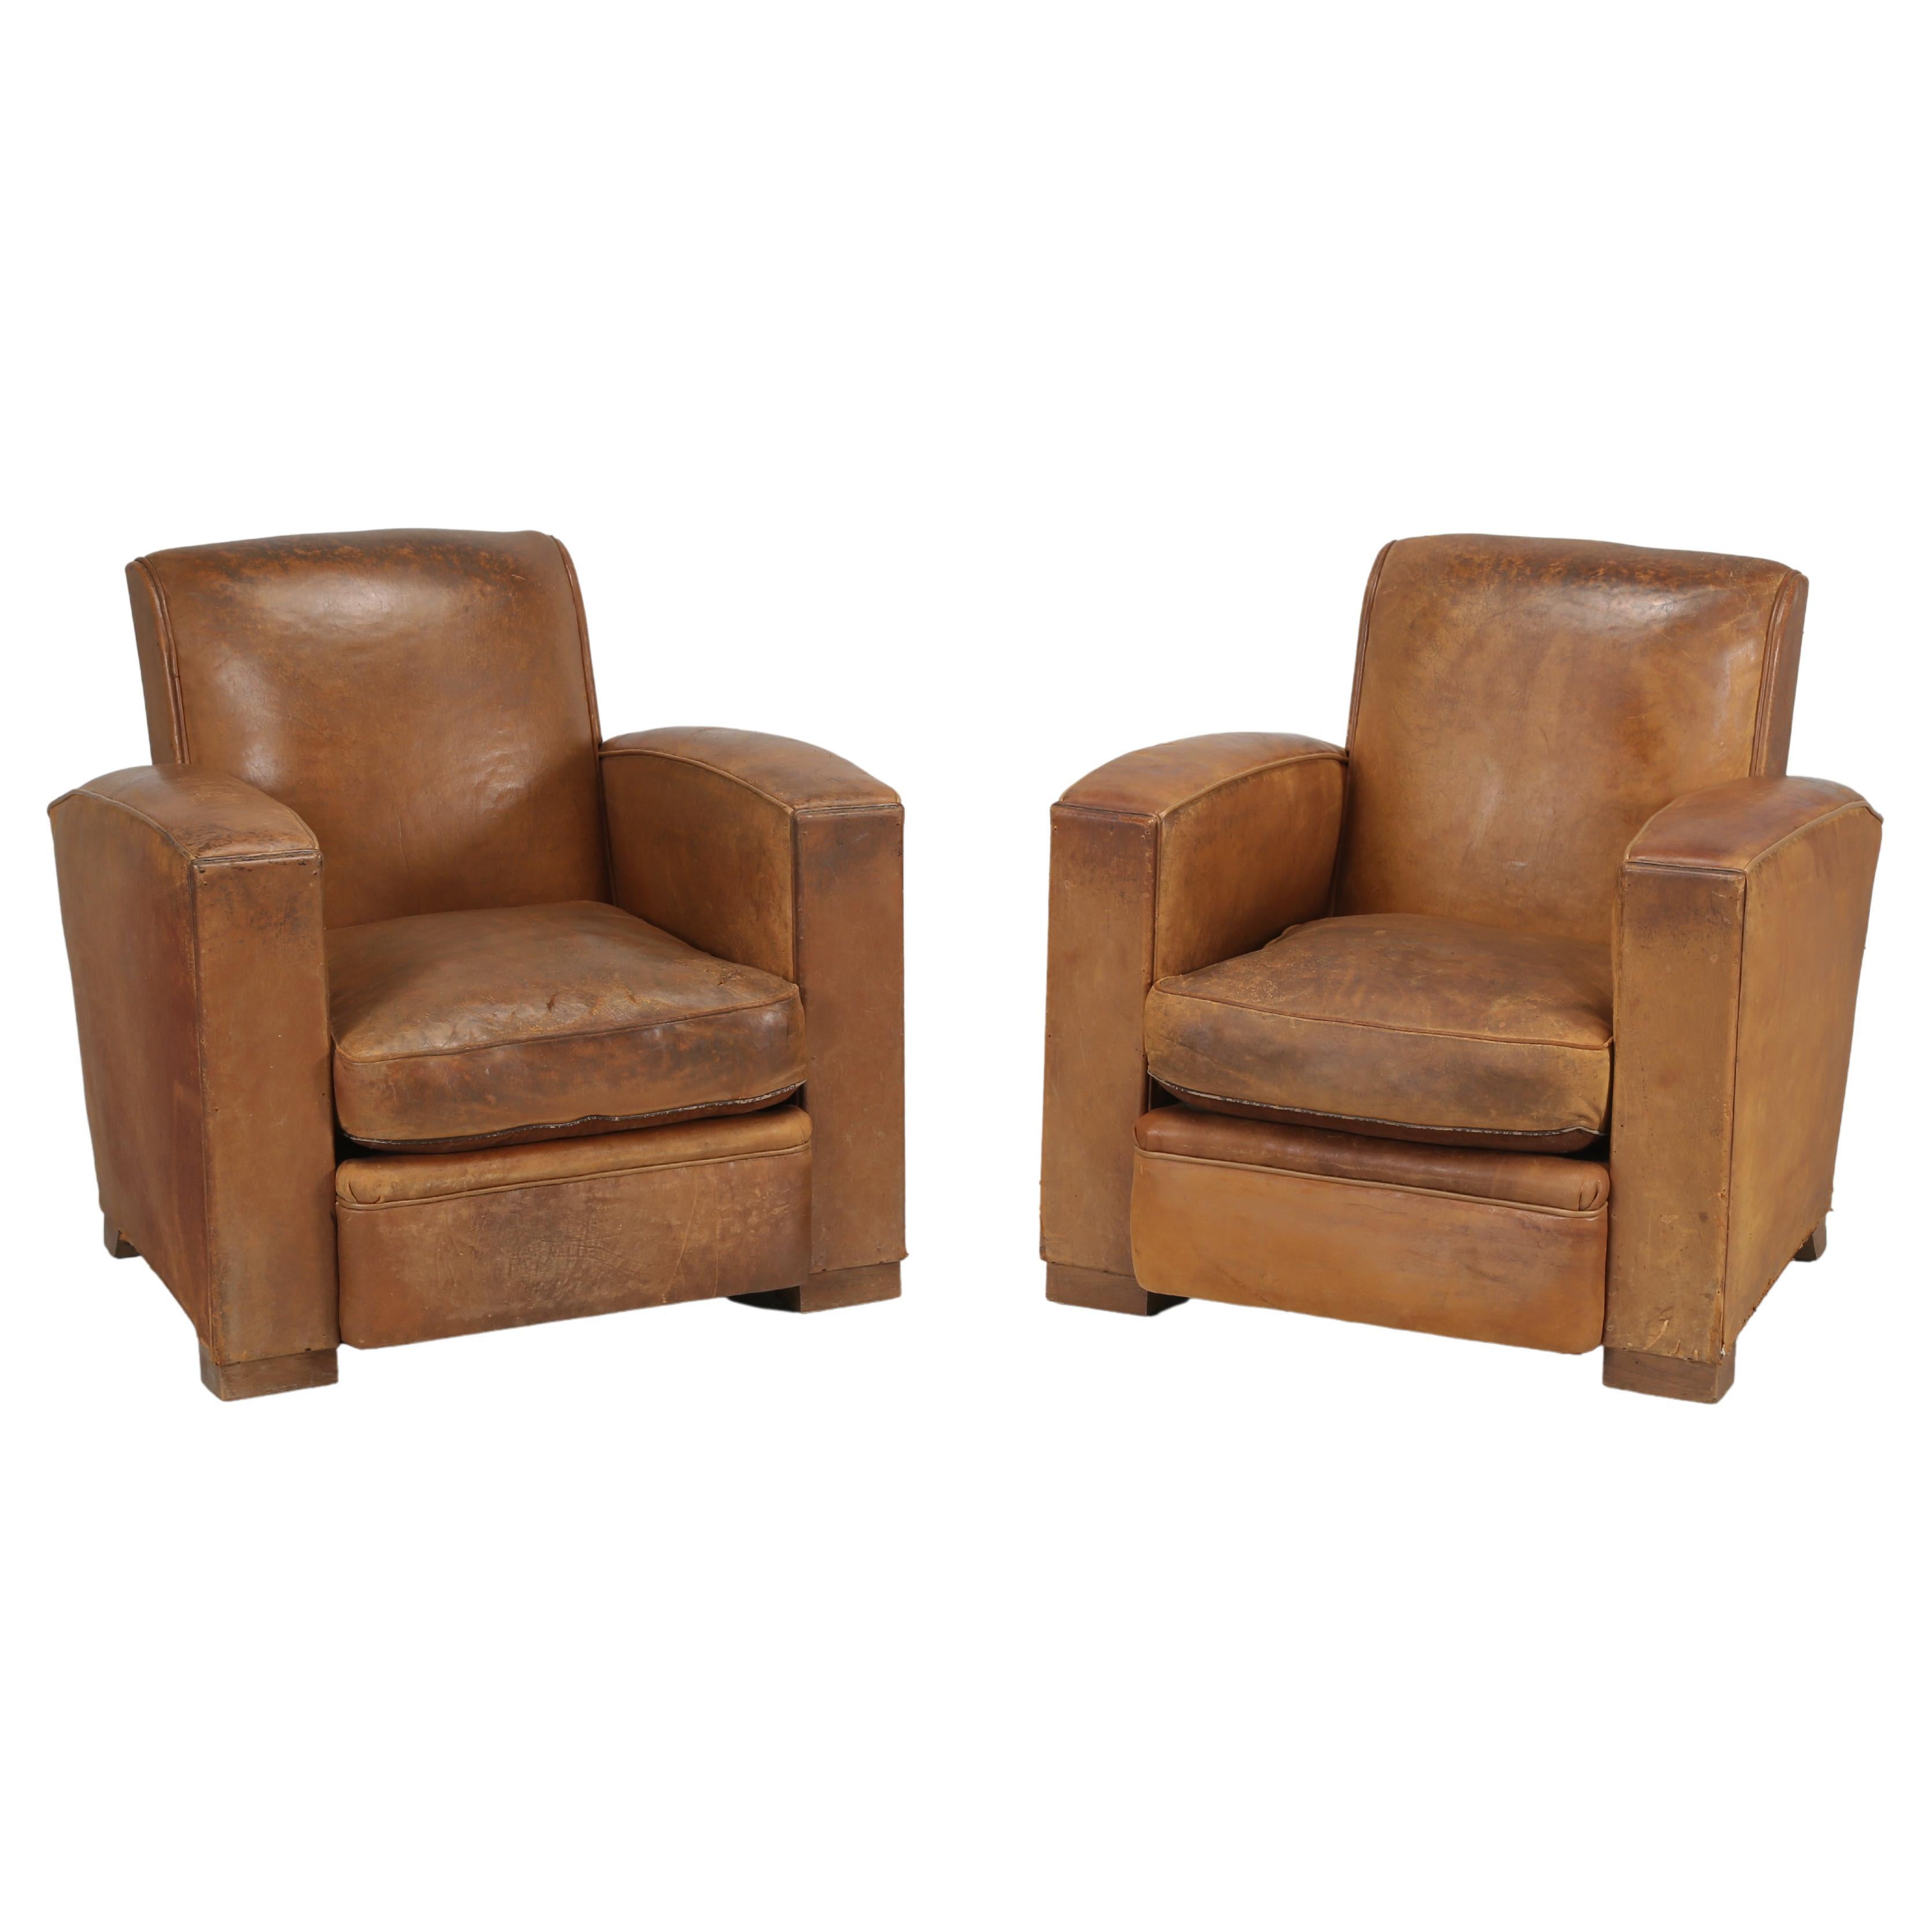 French Leather Club Chairs Restored Internally and Cosmetically Still Original For Sale